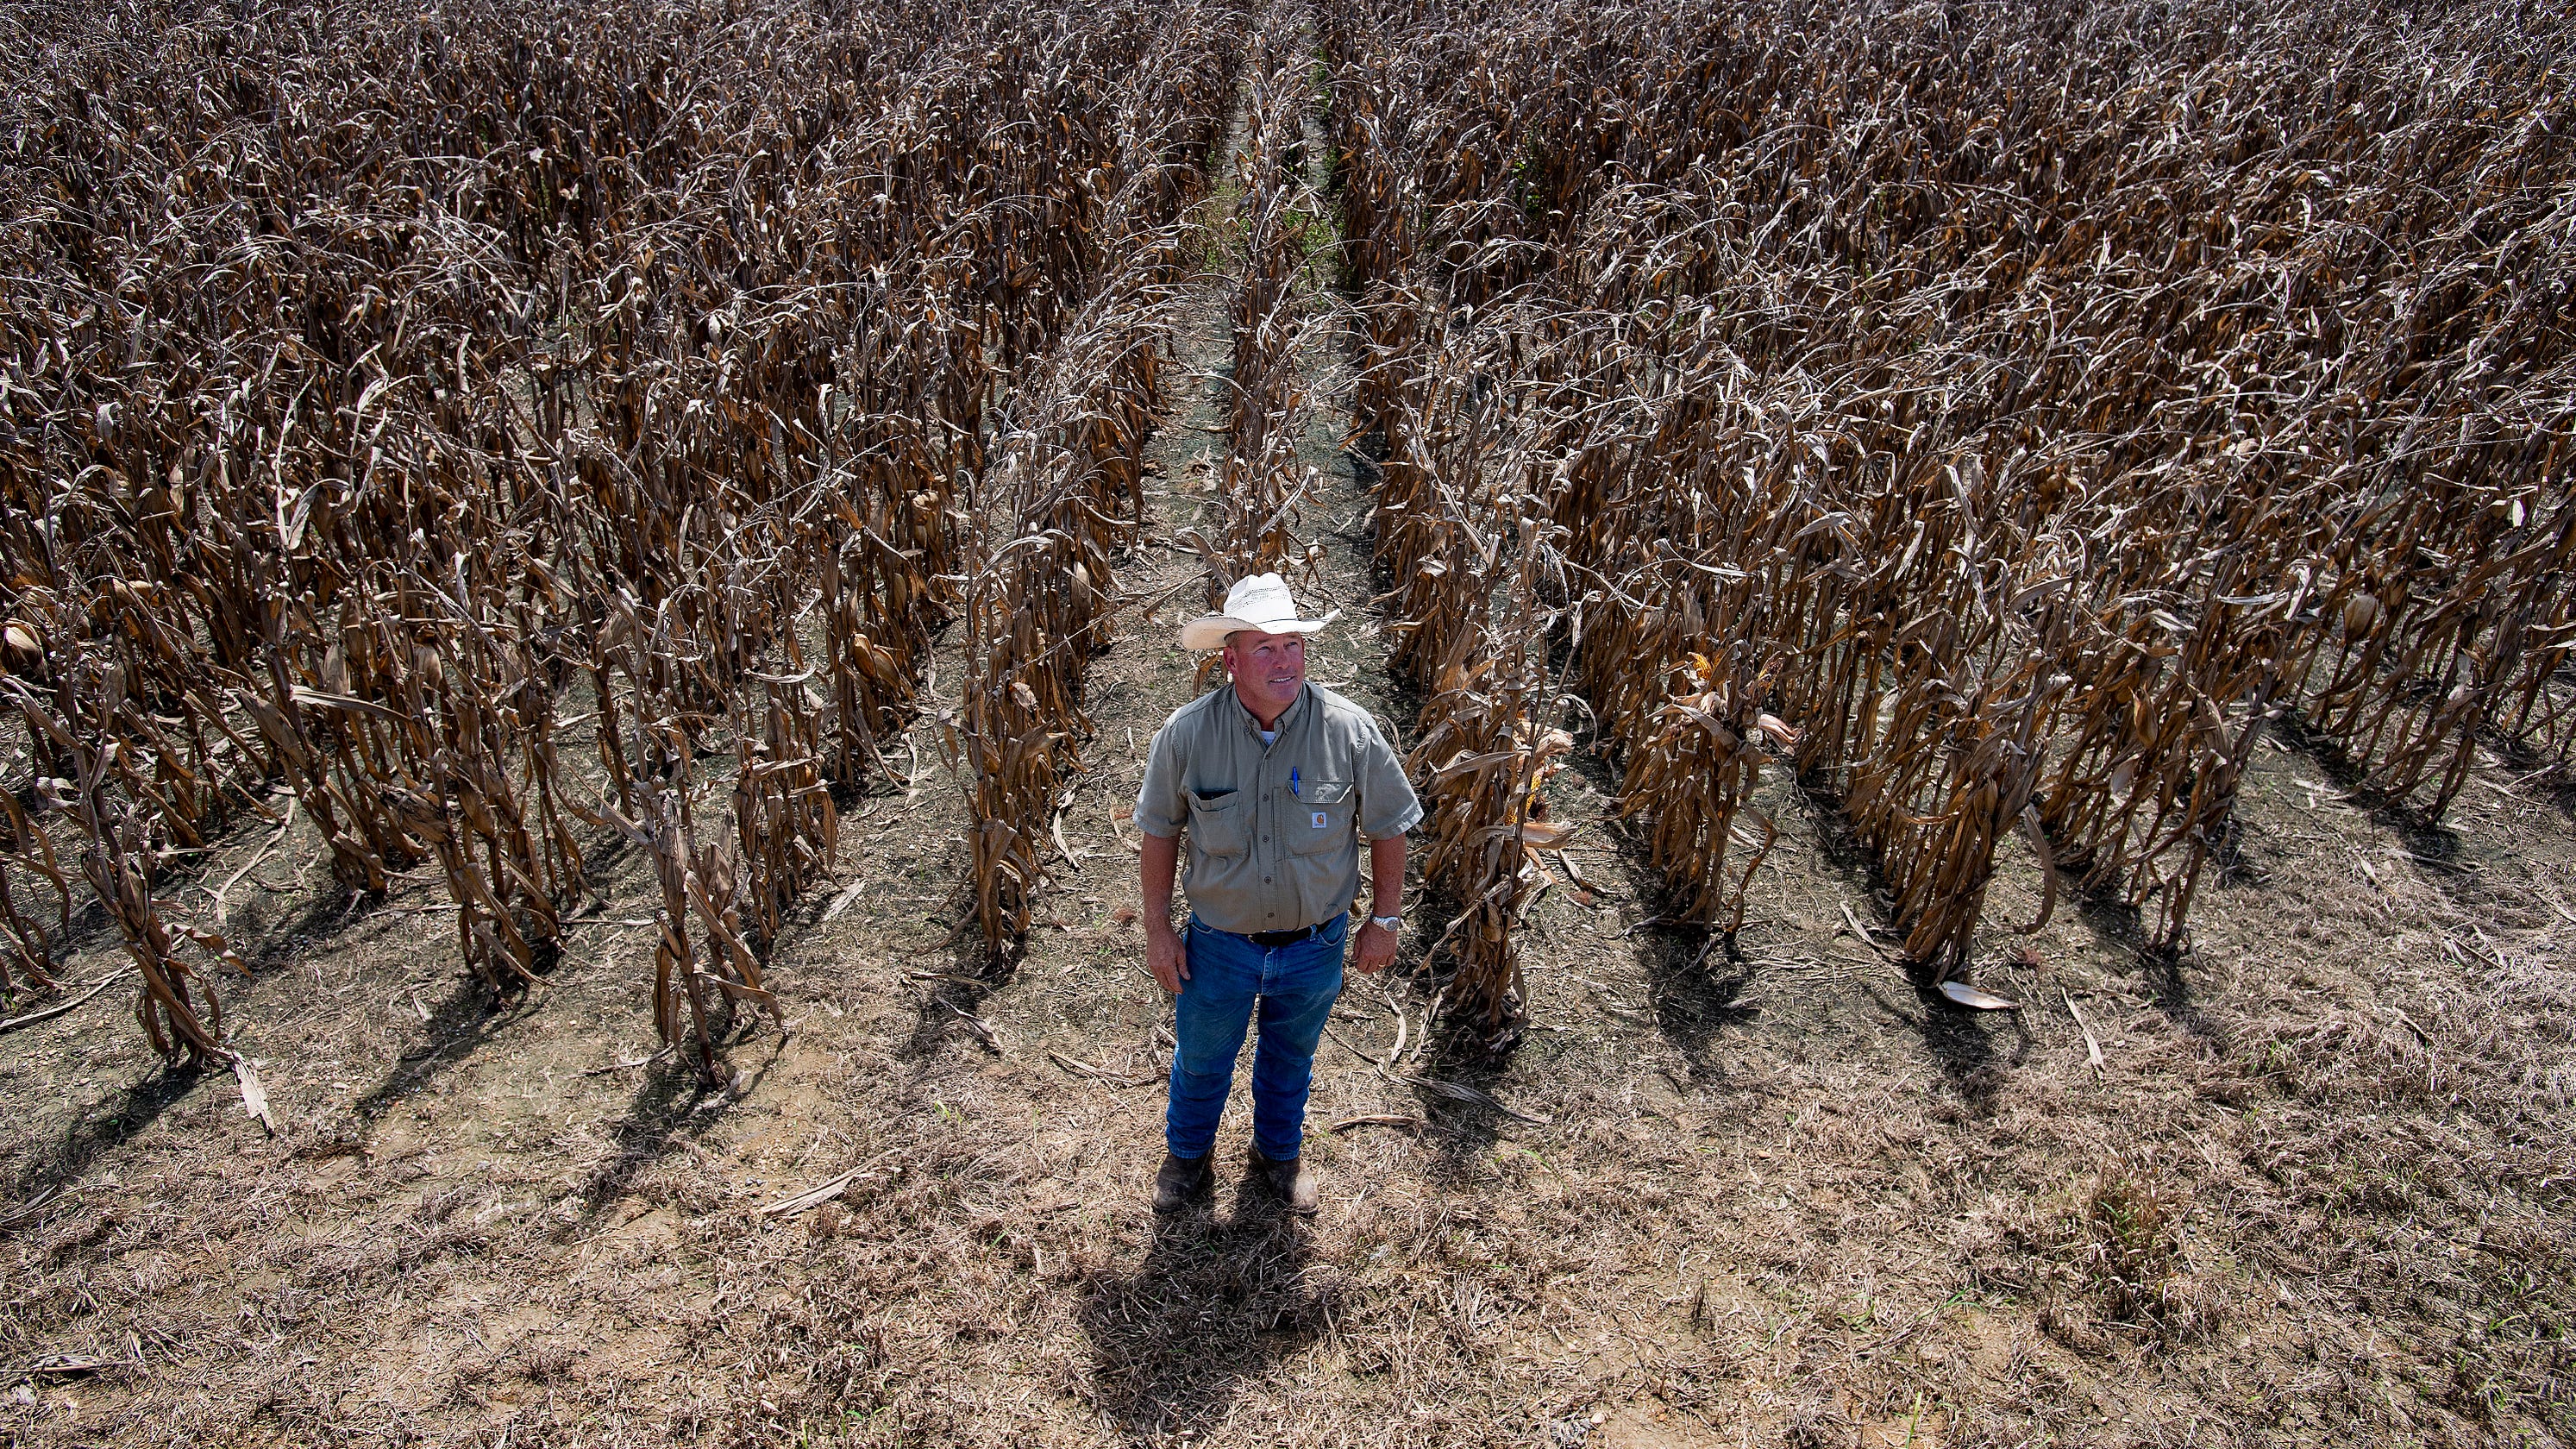 Climate and change: In farming, questions of heat and water - Montgomery Advertiser